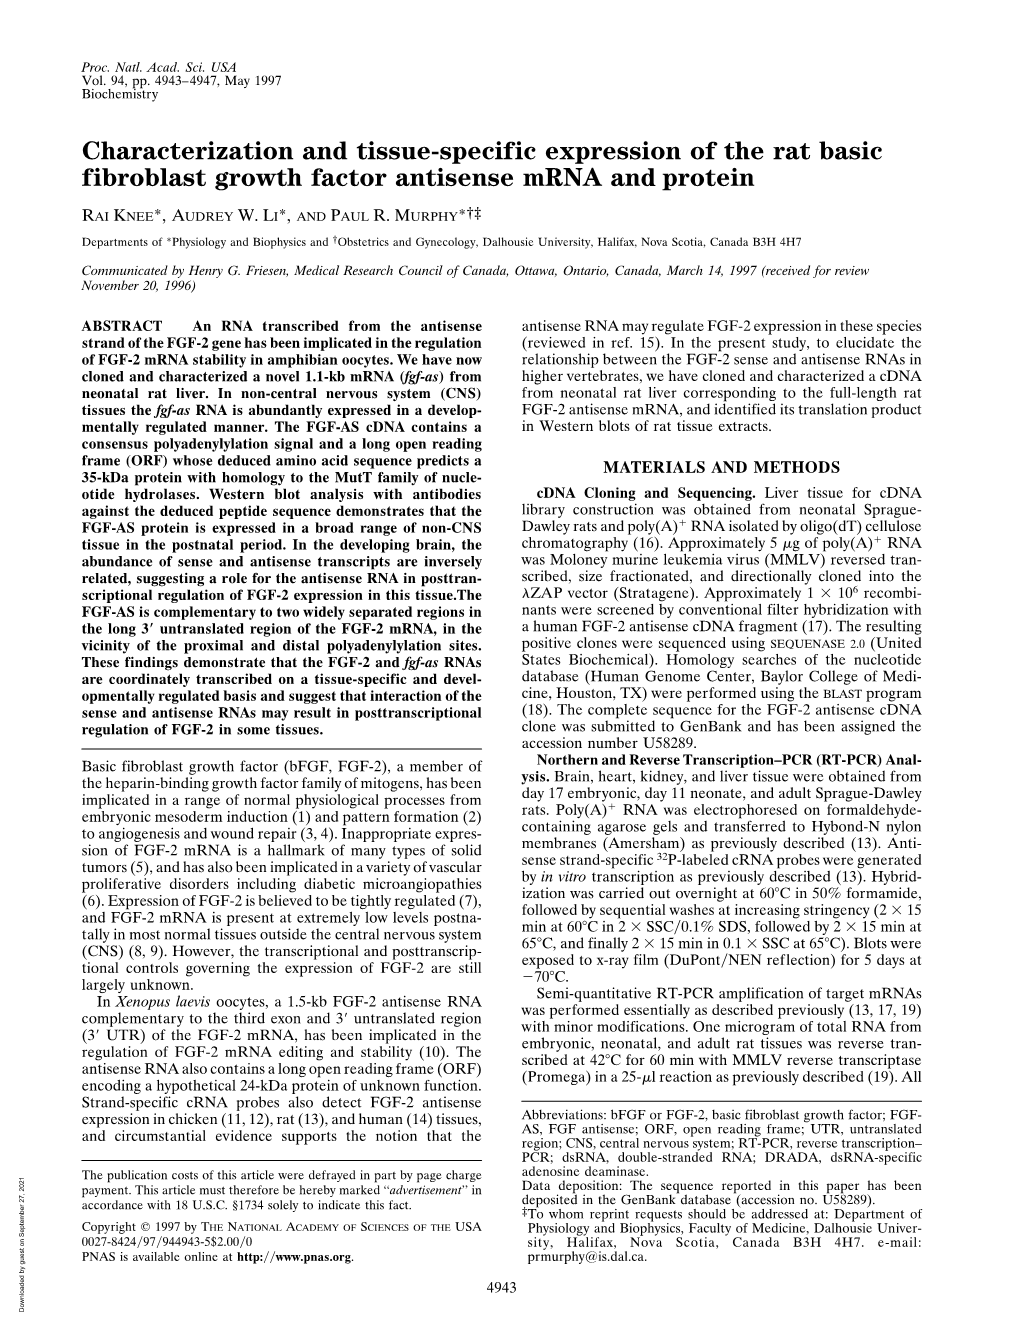 Characterization and Tissue-Specific Expression of the Rat Basic Fibroblast Growth Factor Antisense Mrna and Protein